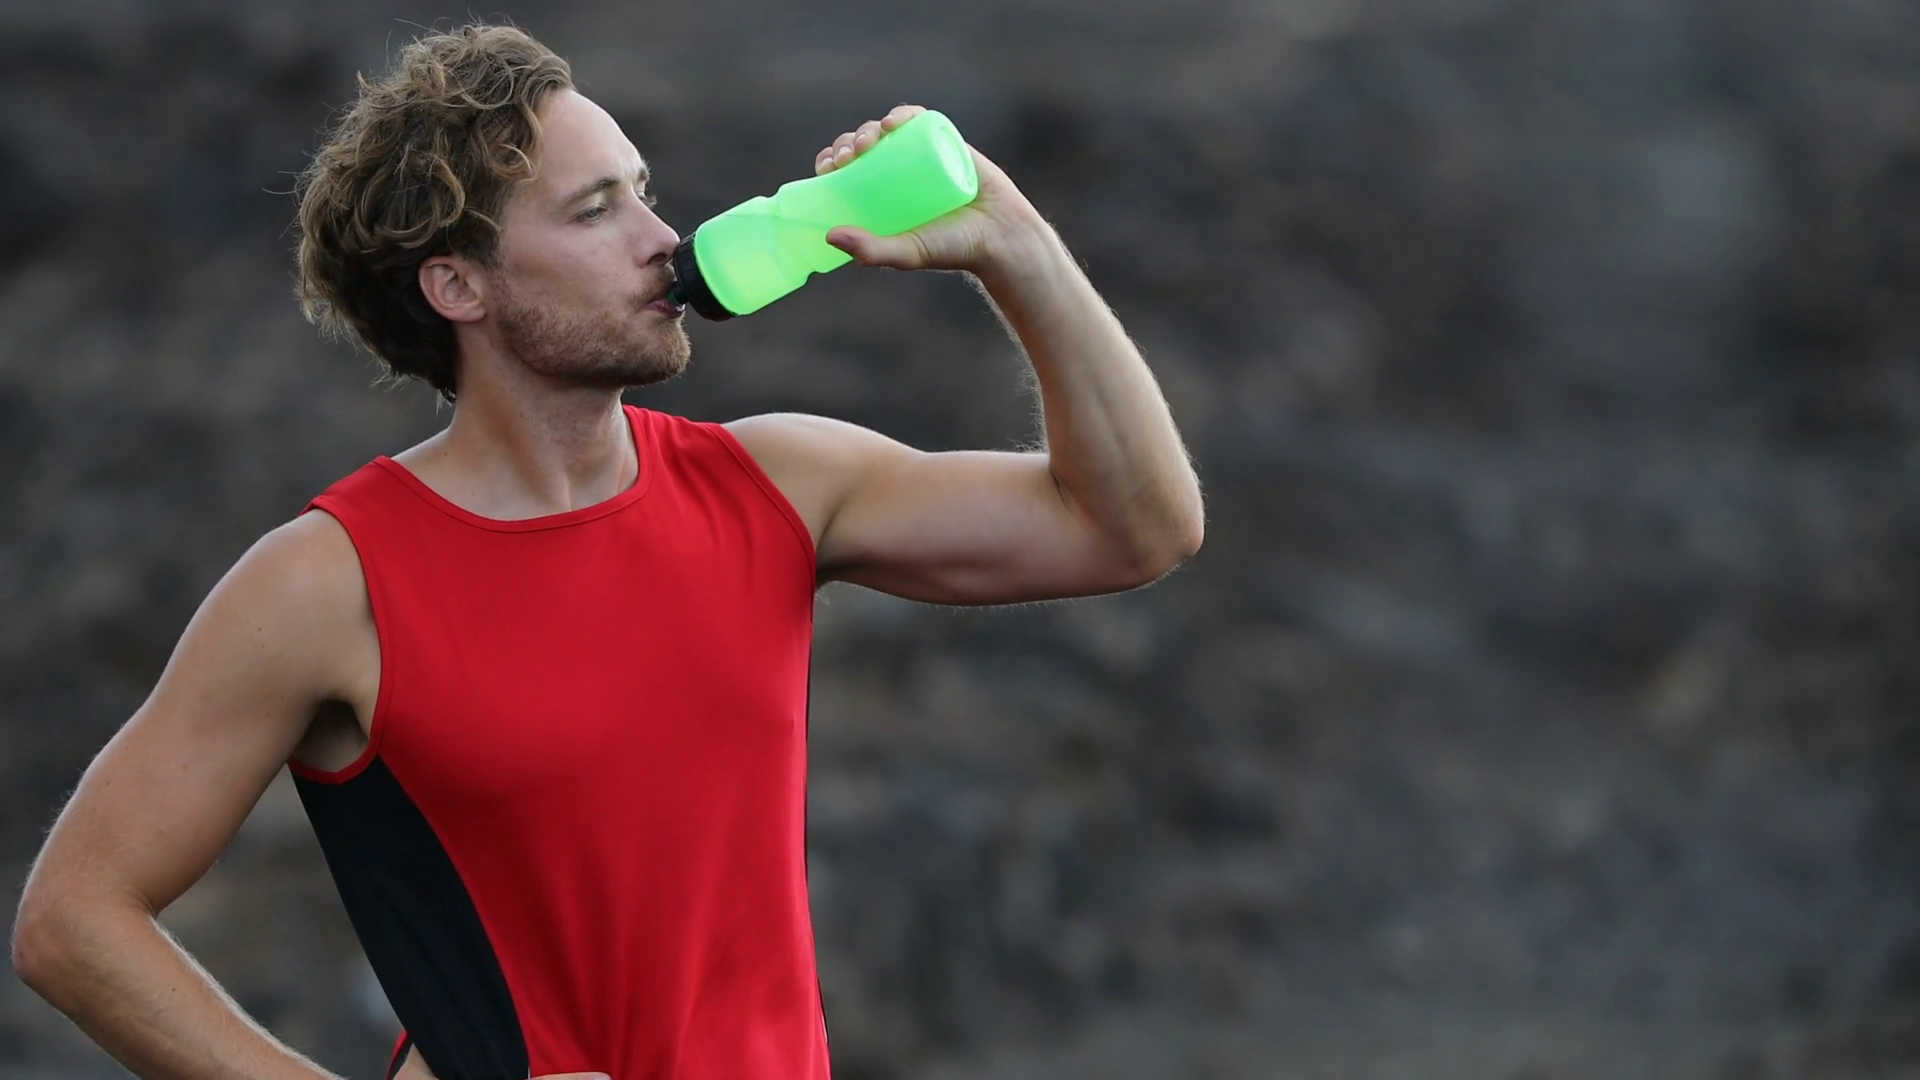 It's important to hydrate yourself occasionally throughout your exercise routine to prevent muscle cramps.